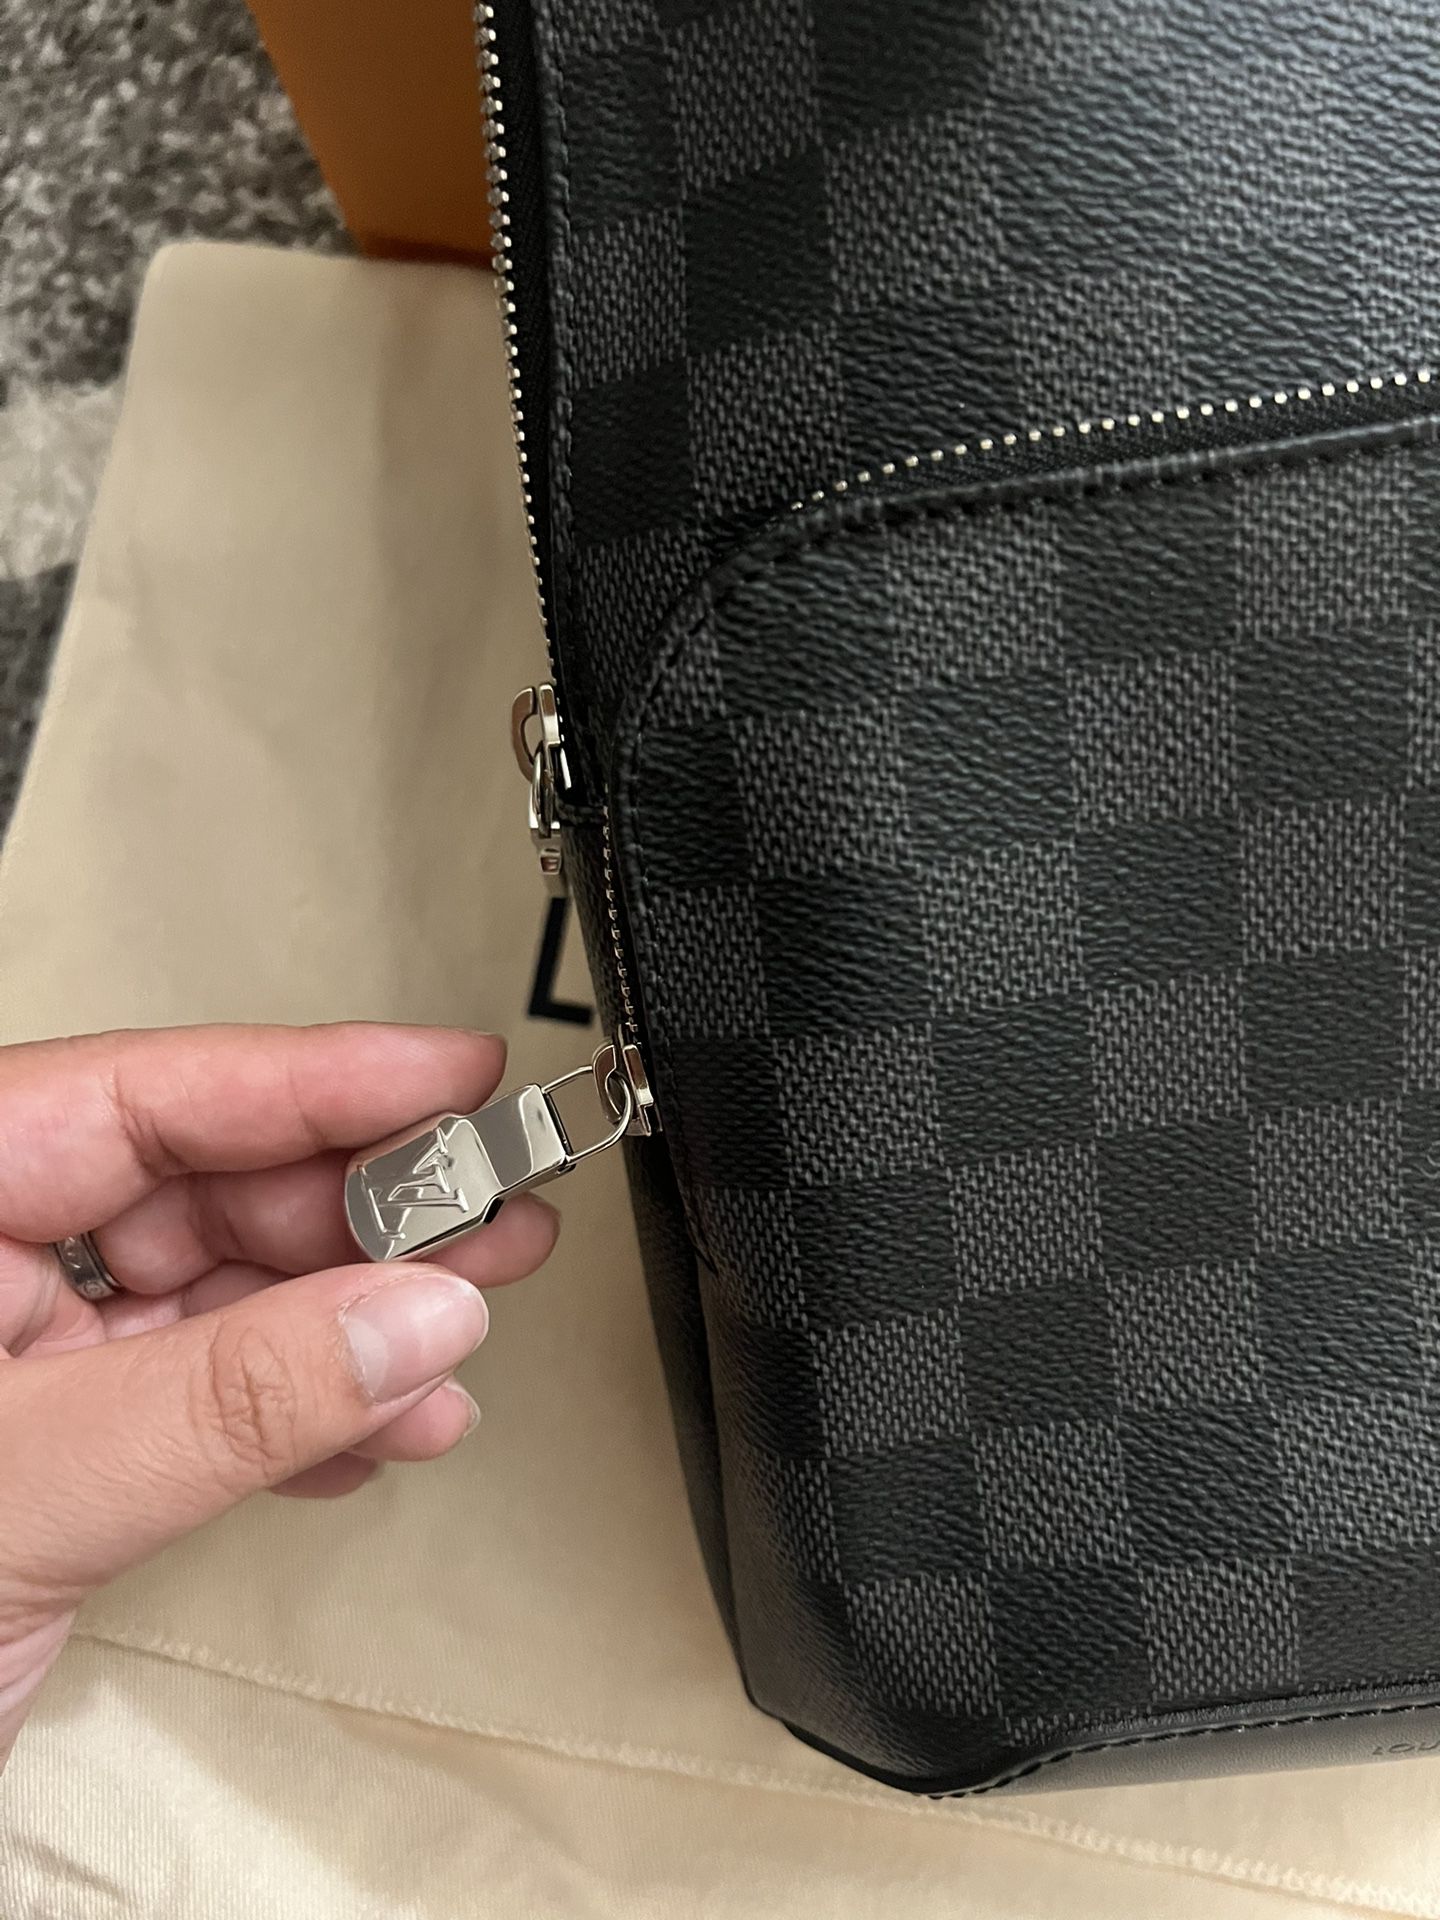 LOUIS VUITTON Avenue Slingbag NM in Damier Graphite - AUTHENTIC - N45302  for Sale in Philadelphia, PA - OfferUp